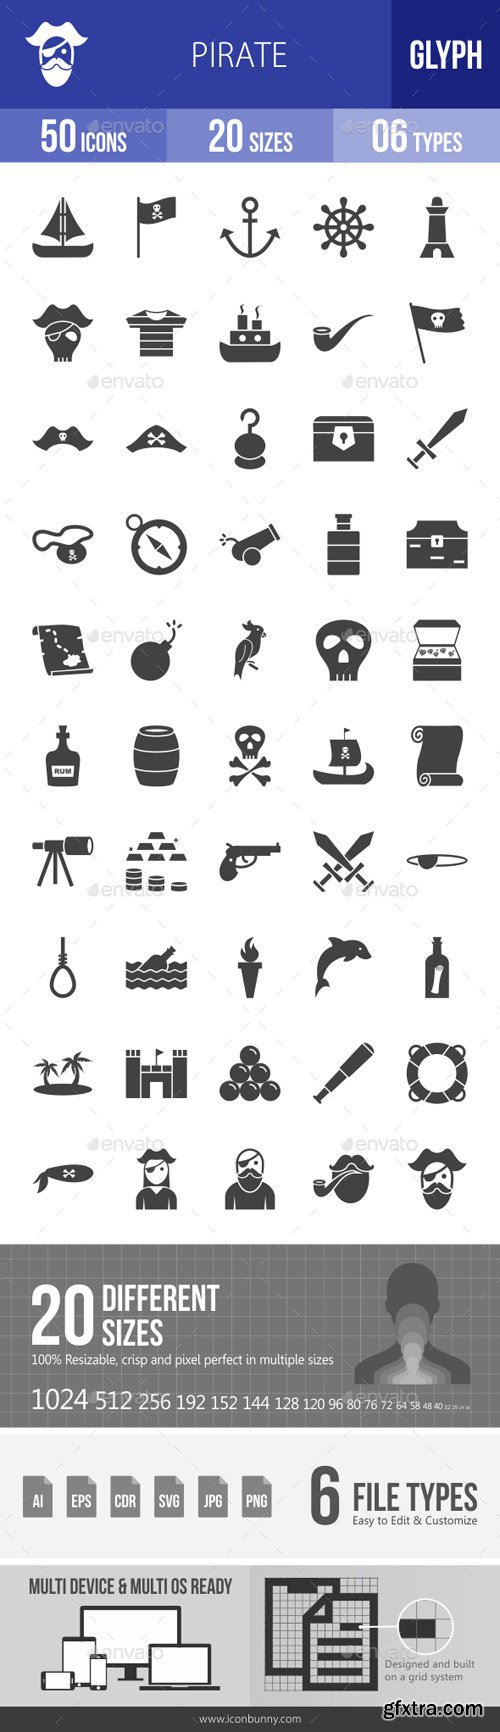 GR - Pirate Glyph Icons 19407583